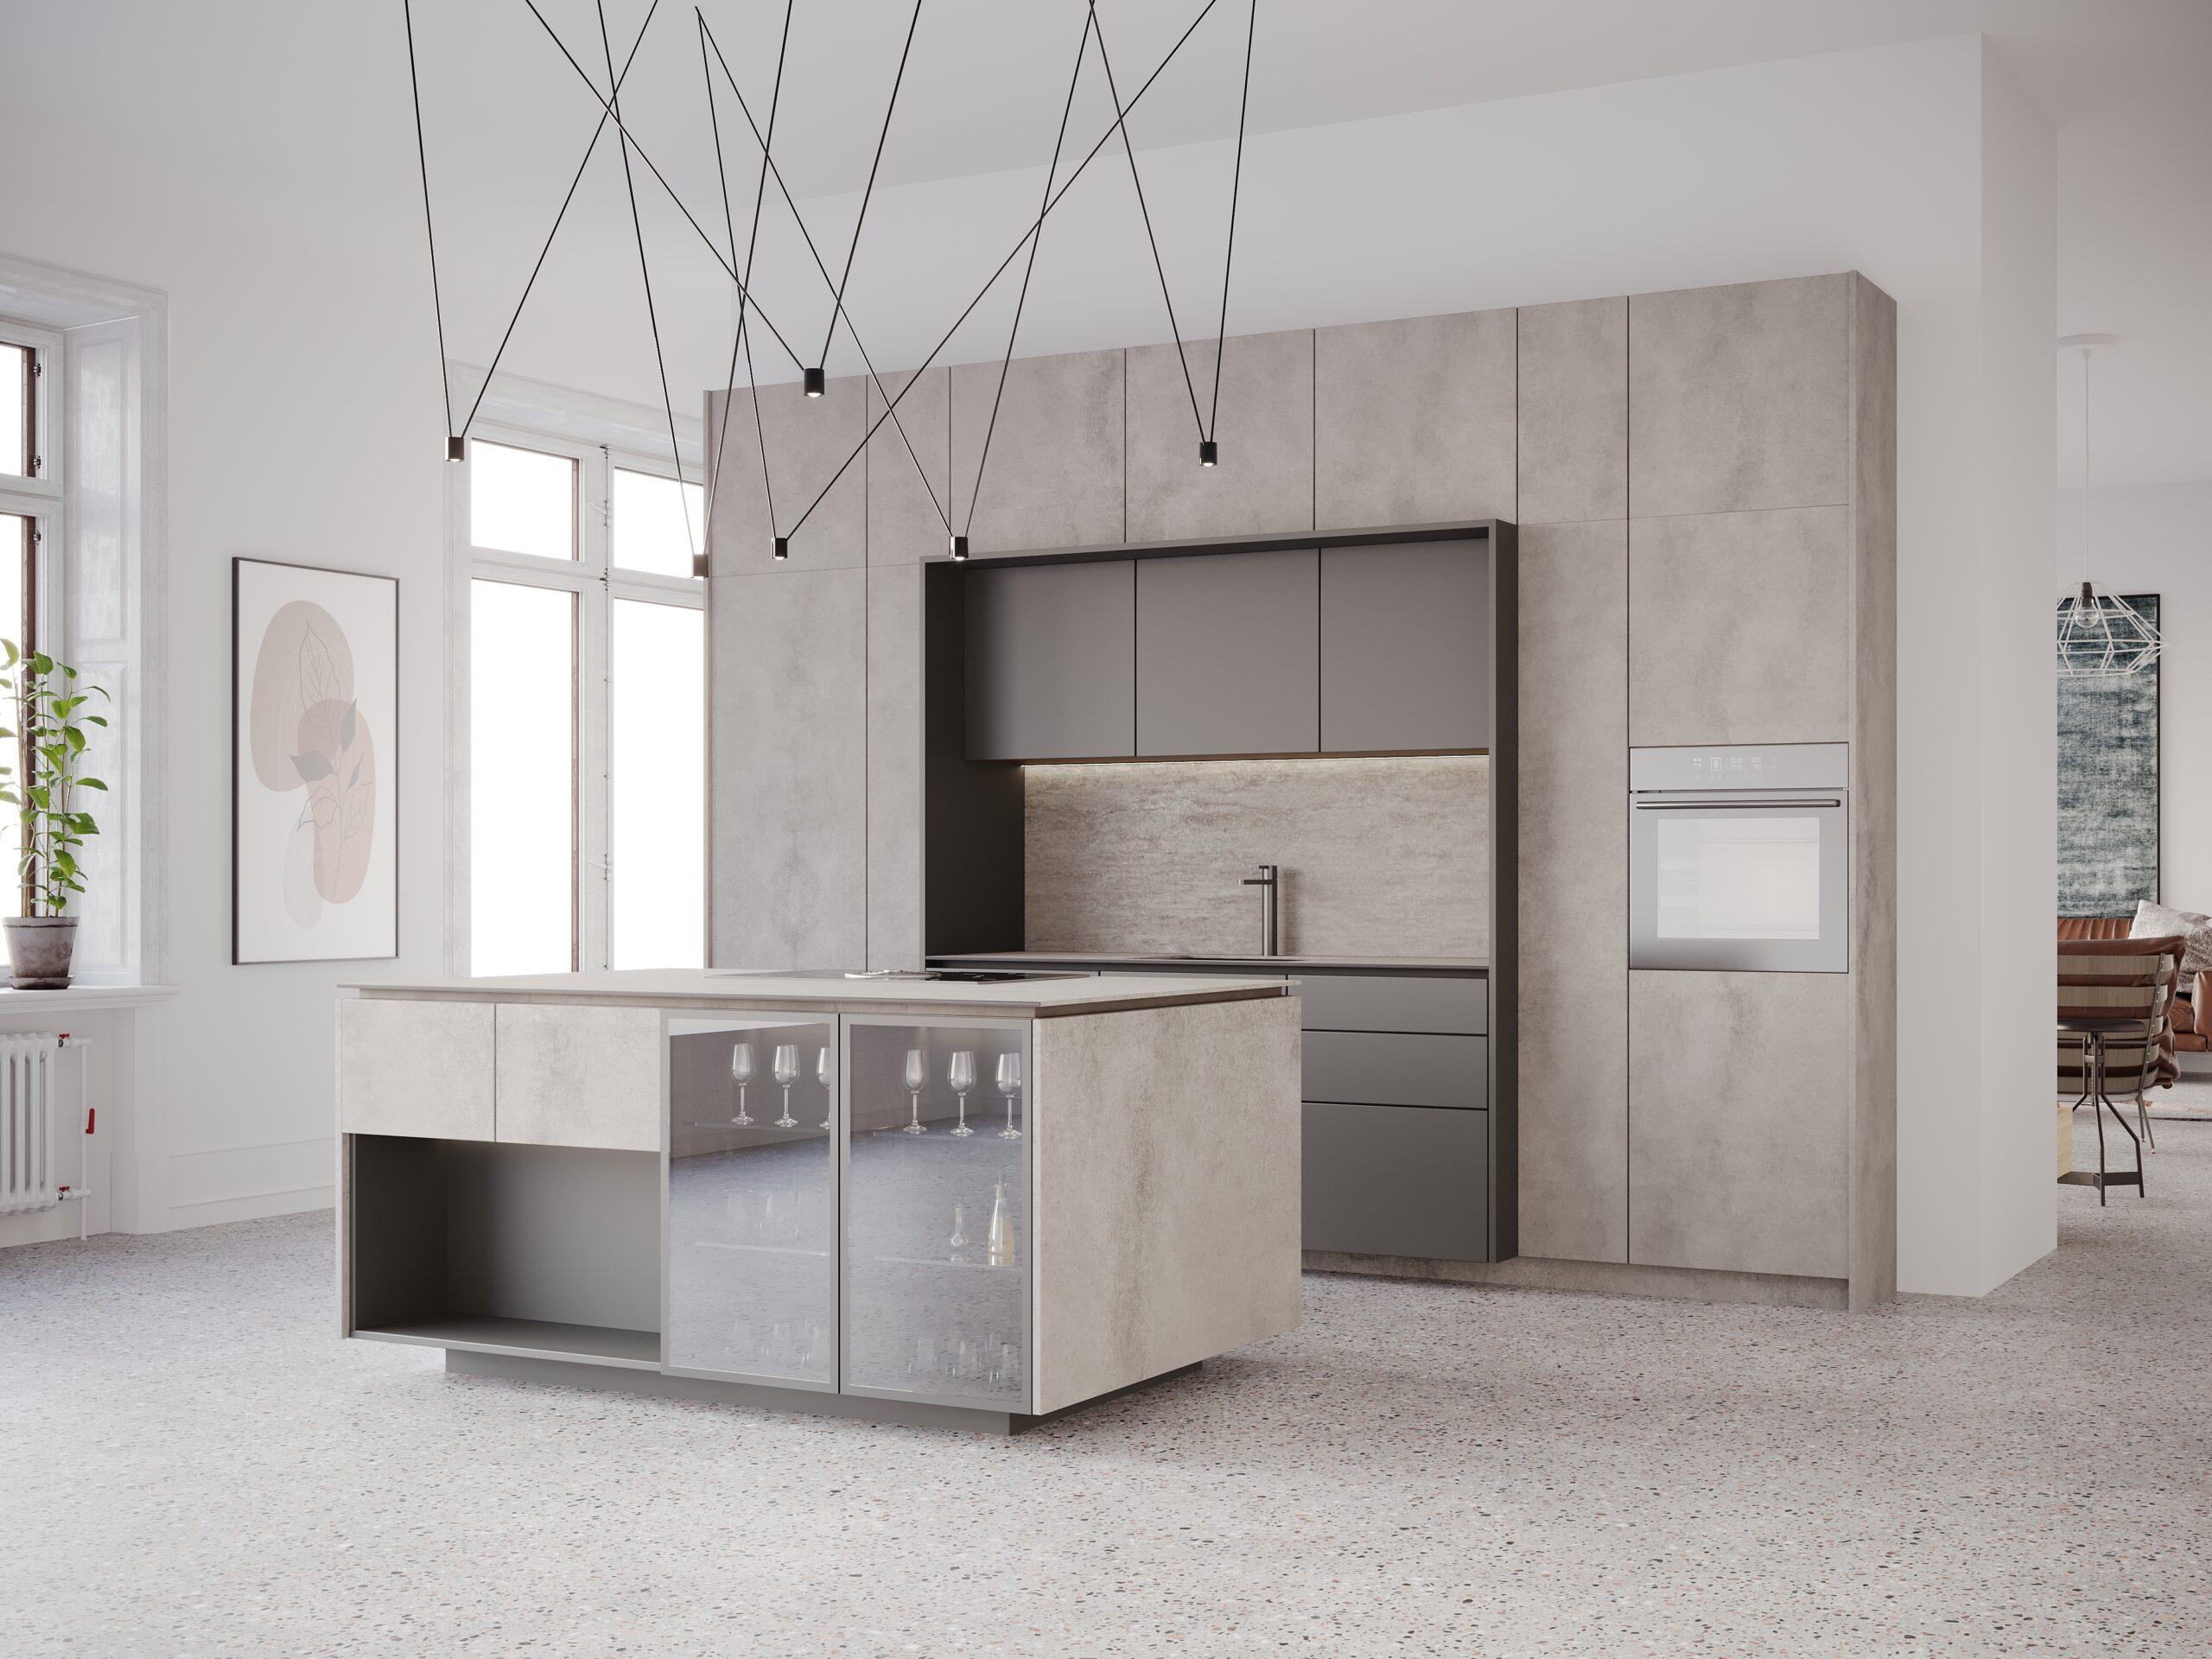 Urban style kitchen matching floor and wall materials